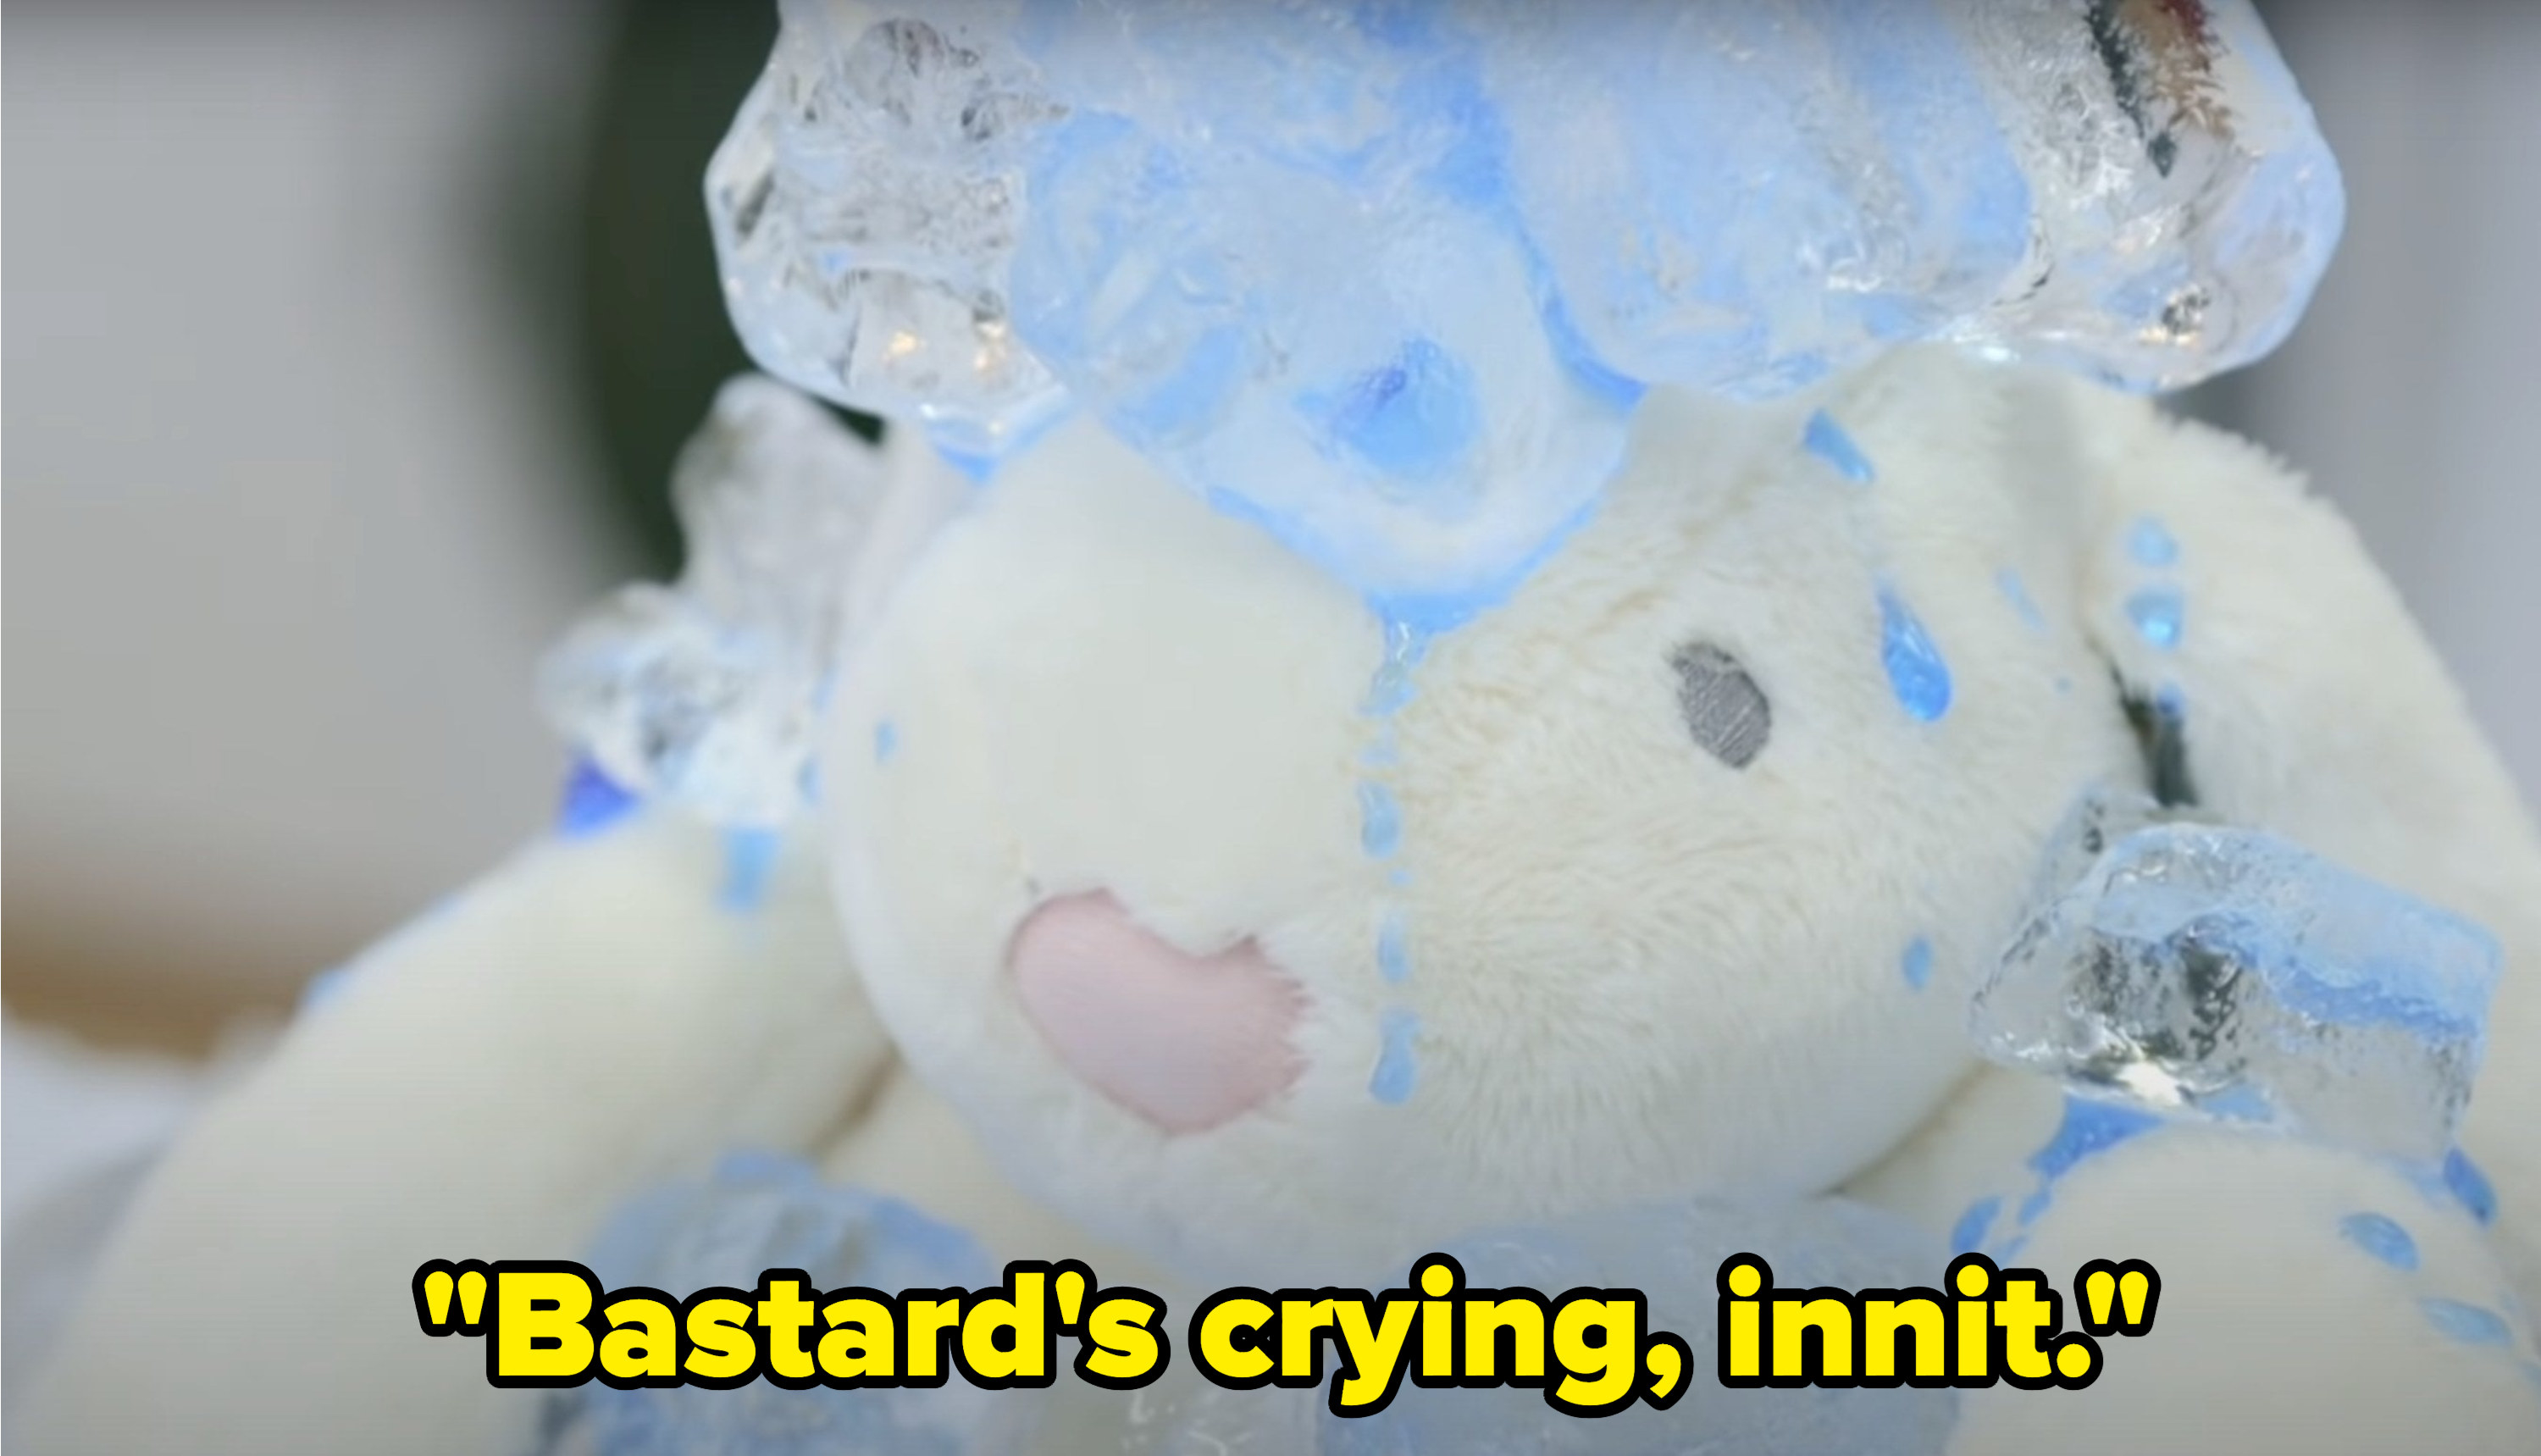 Over the image of blue droplets on a stuffed bunny, Paul Chowdhry says, Bastards crying, innit